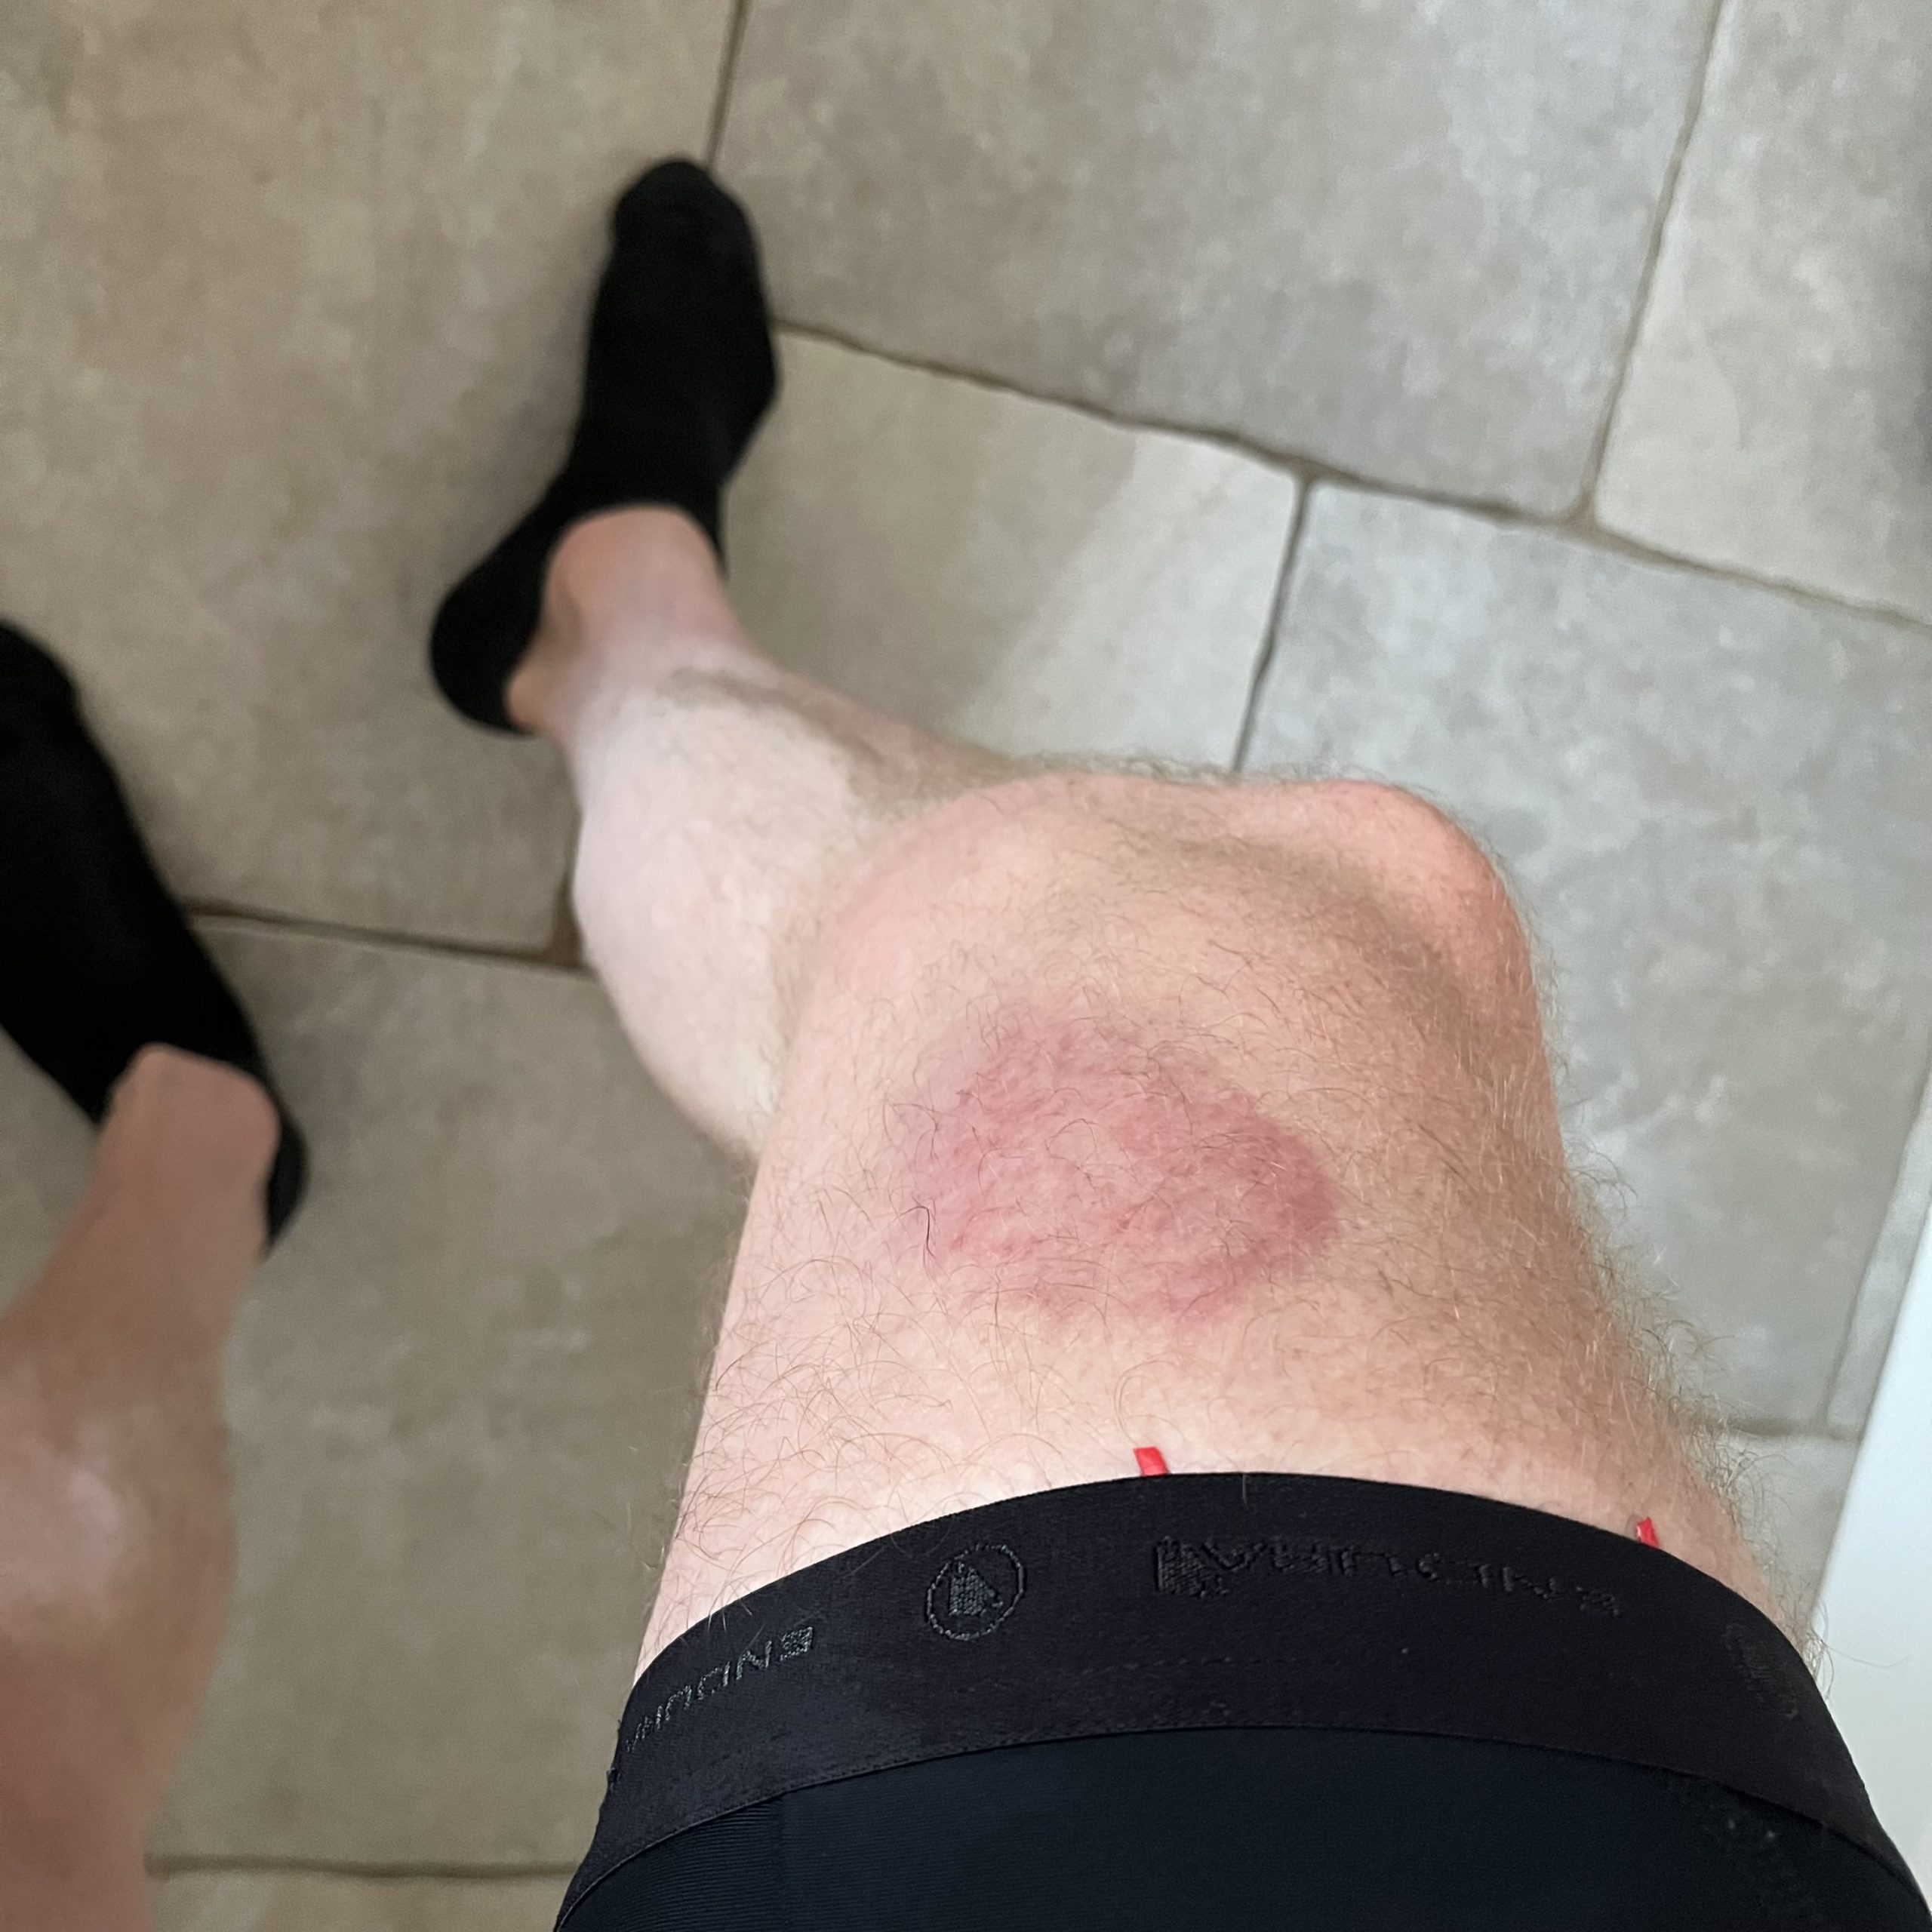 Horsefly bites are the gifts that keep on giving